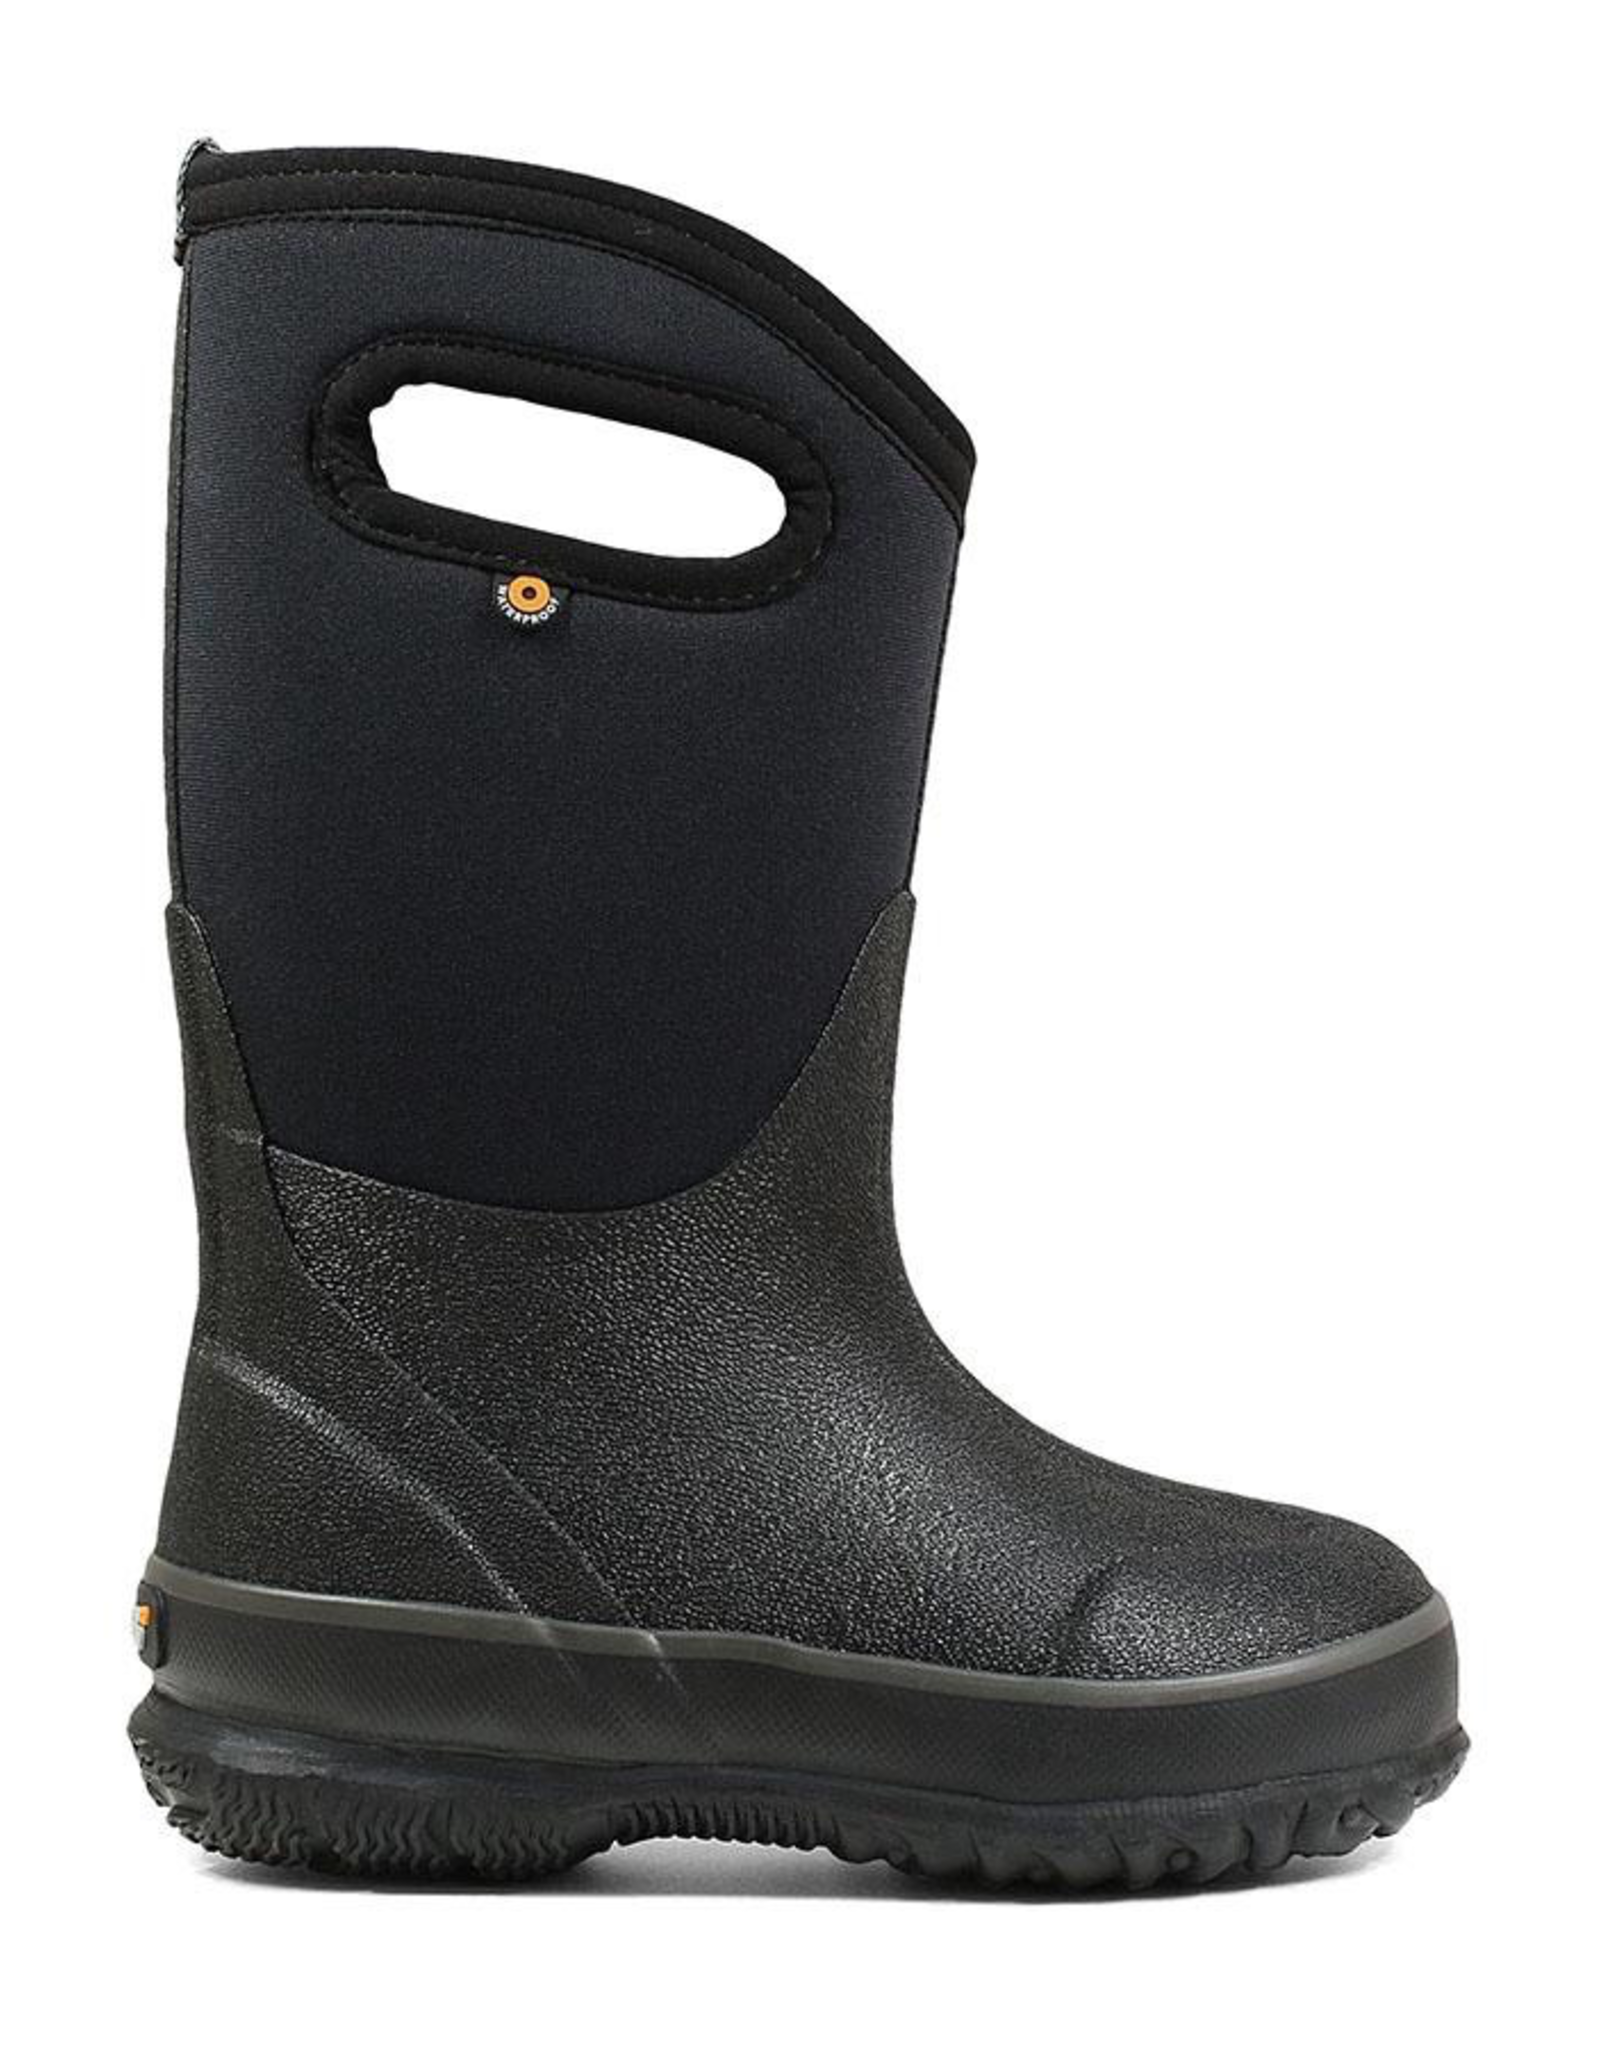 black insulated boots